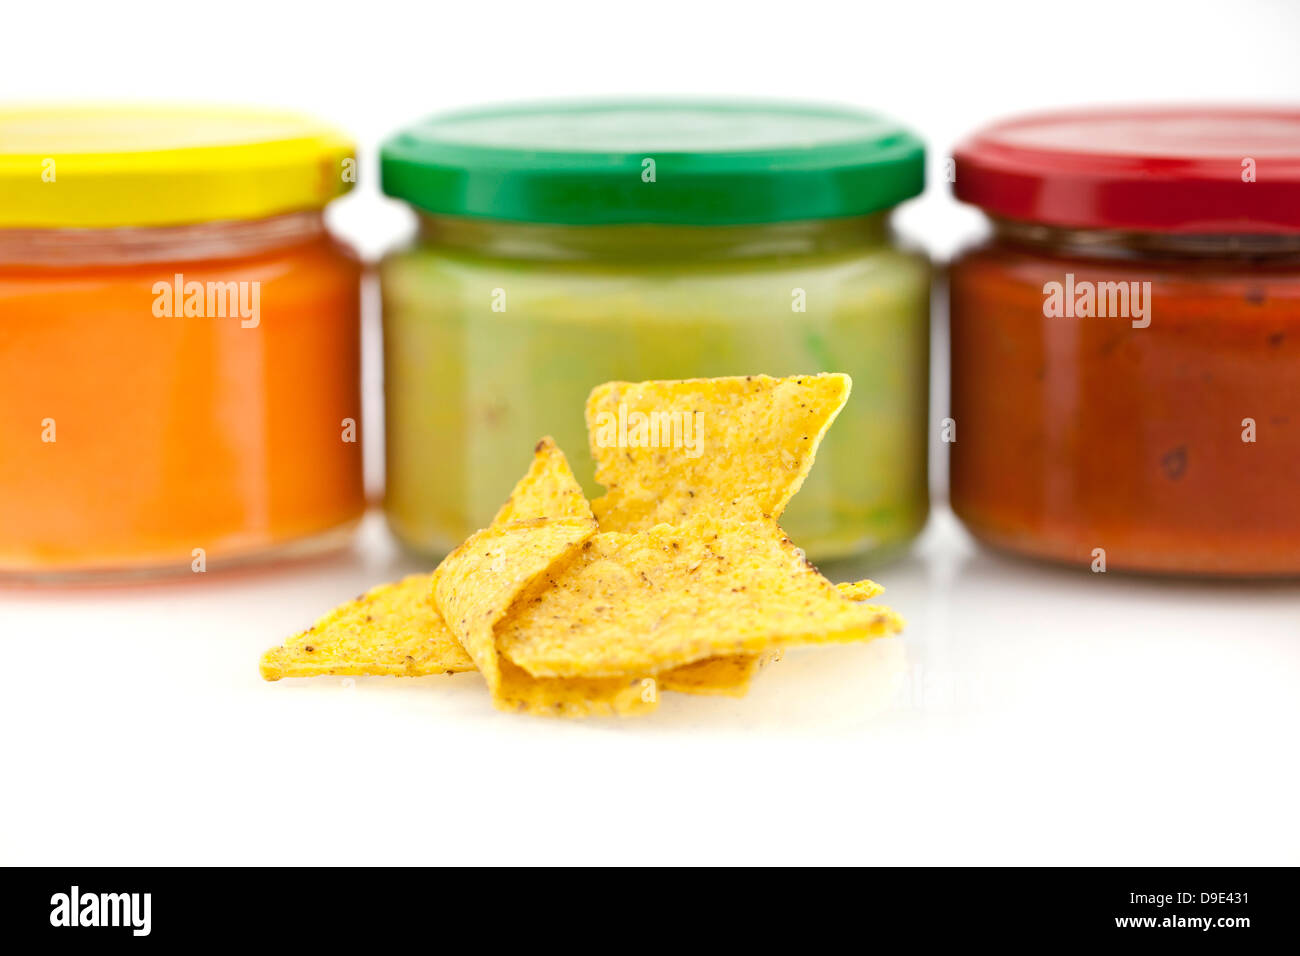 Traditional nacho chips and Mexican dips isolated on white background Stock Photo